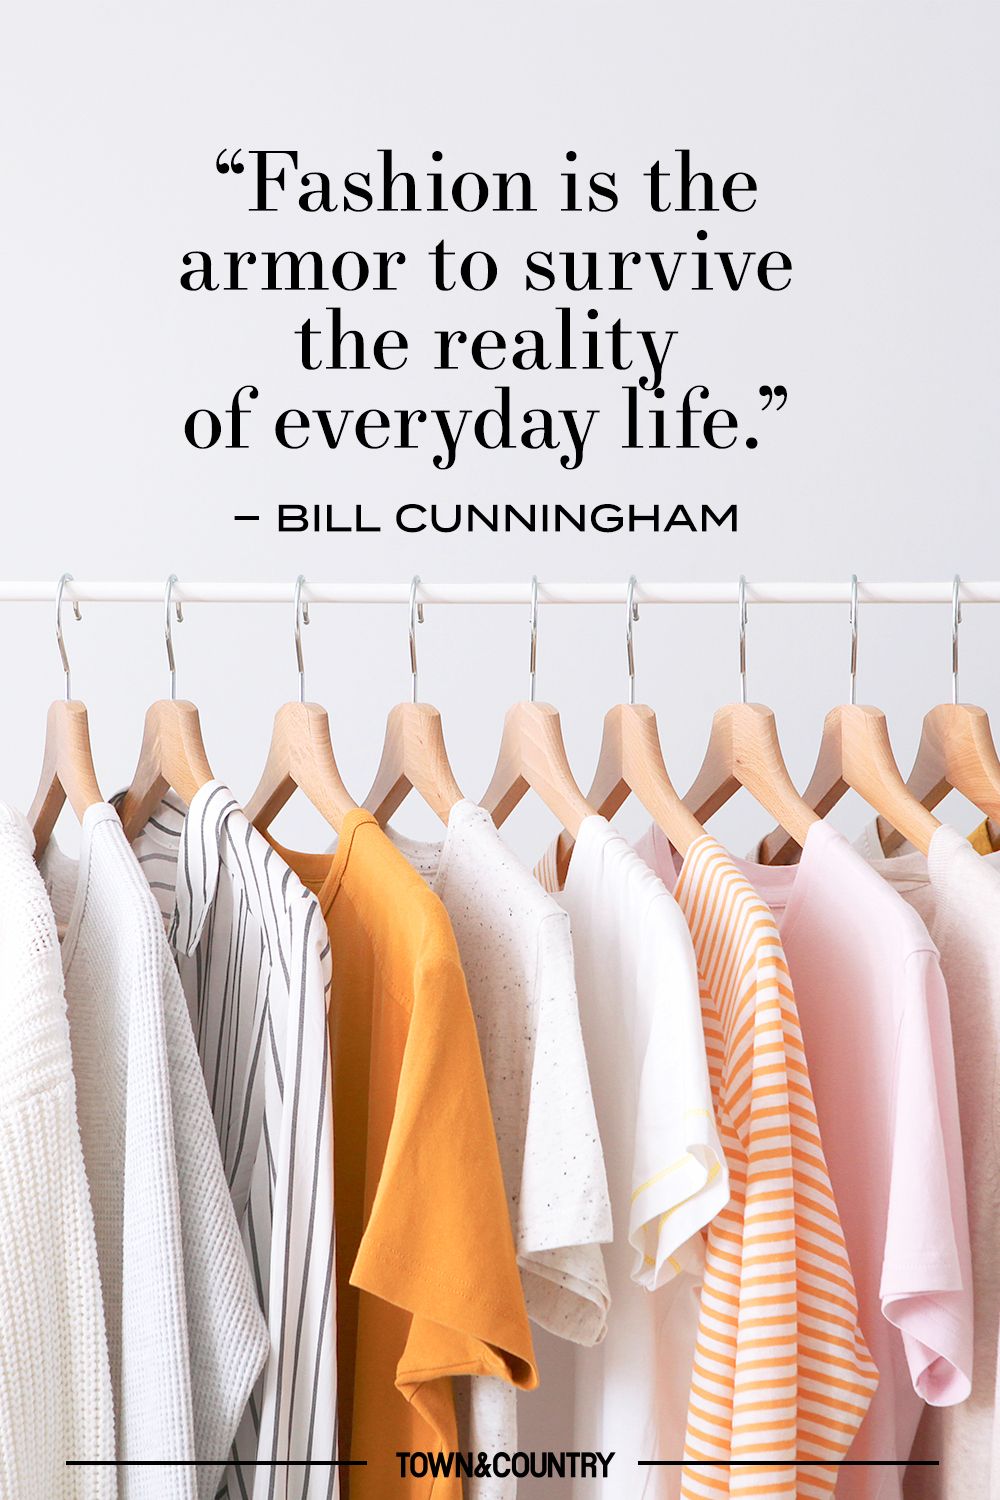 140 Fashion Quotes on Design & New Collection Captions (2023)